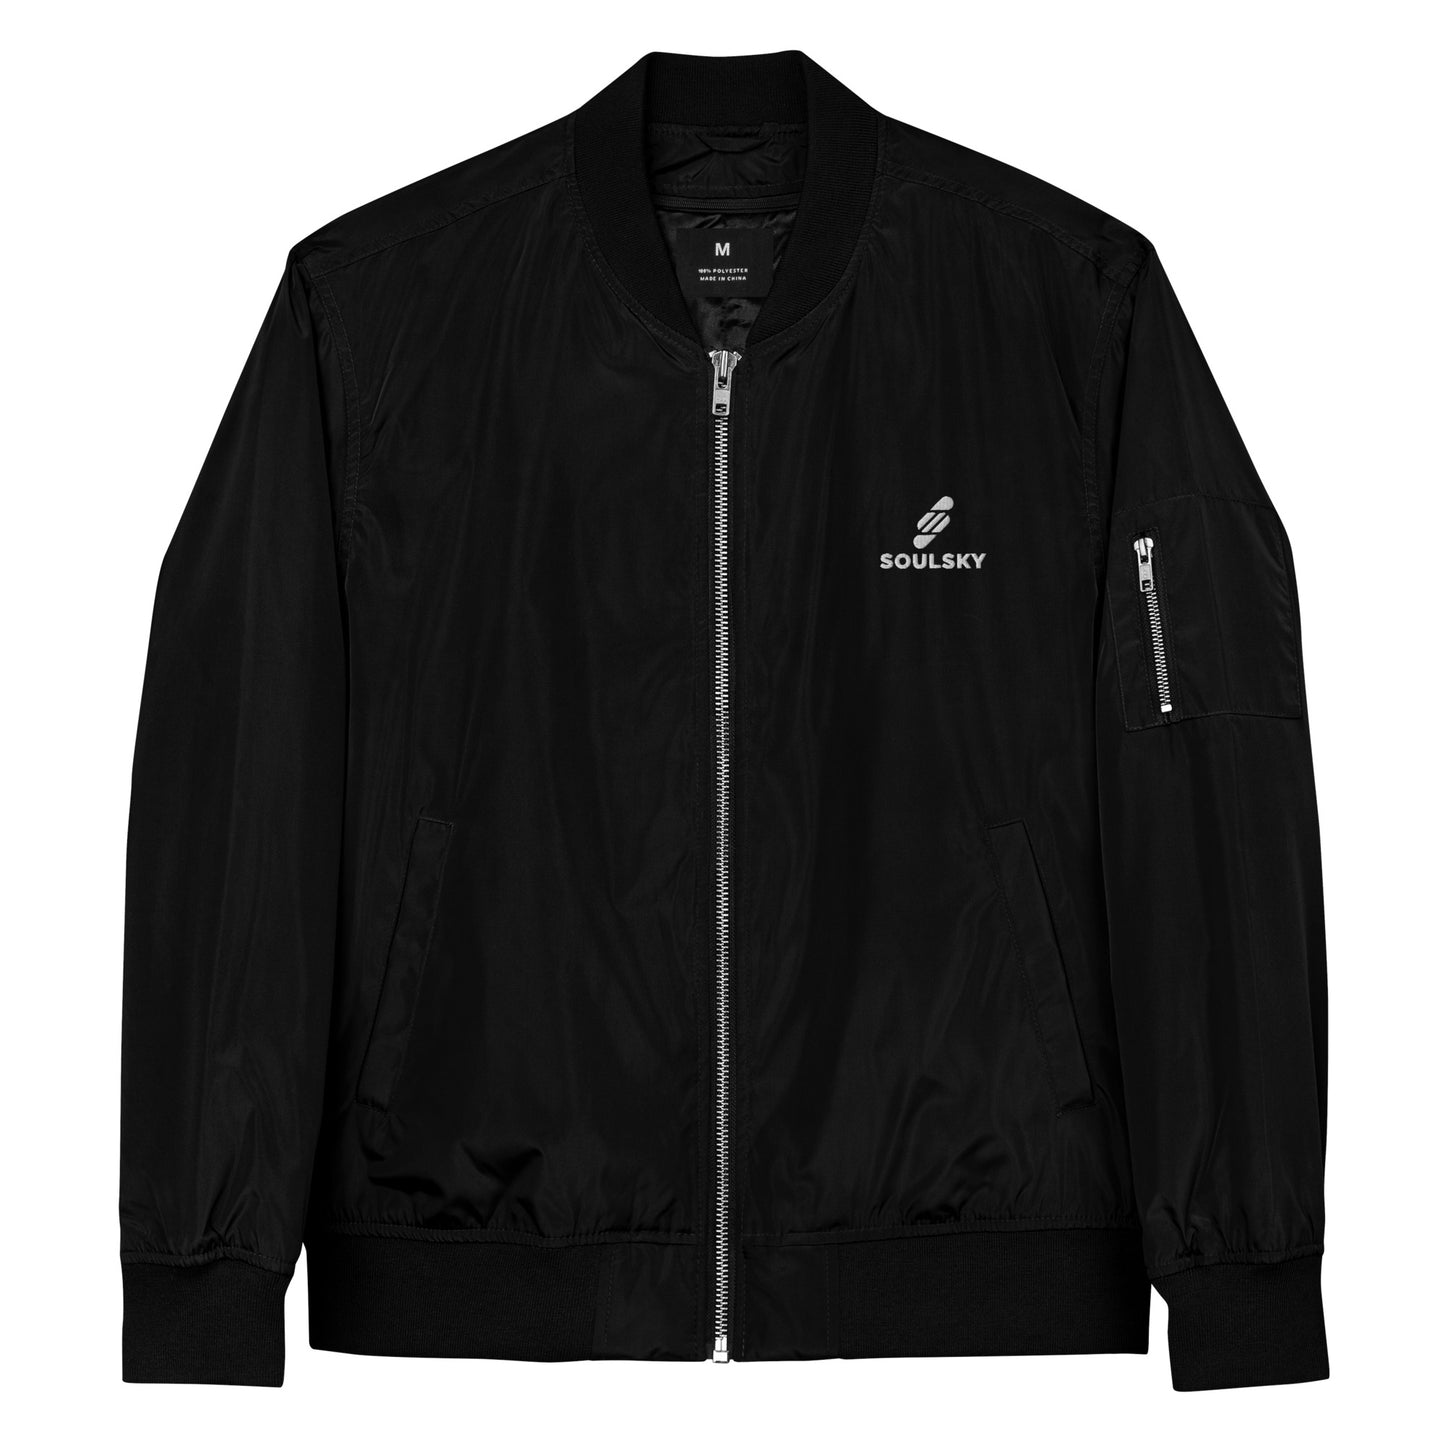 YOU ARE NOT ALONE Premium Bomber Jacket